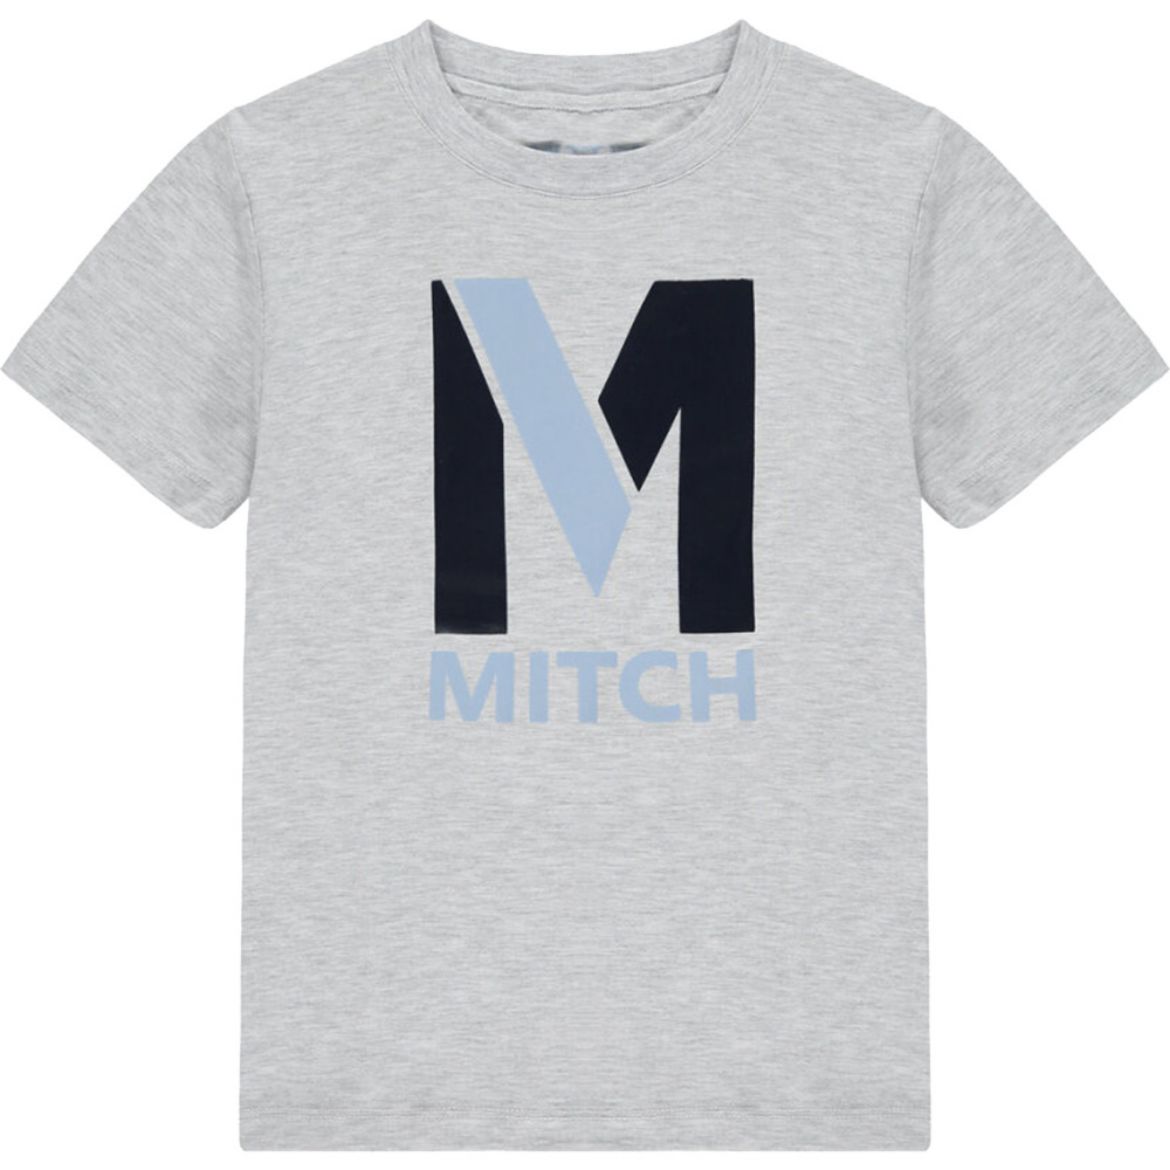 Picture of Mitch Boys 'Montreal' Grey T-shirt